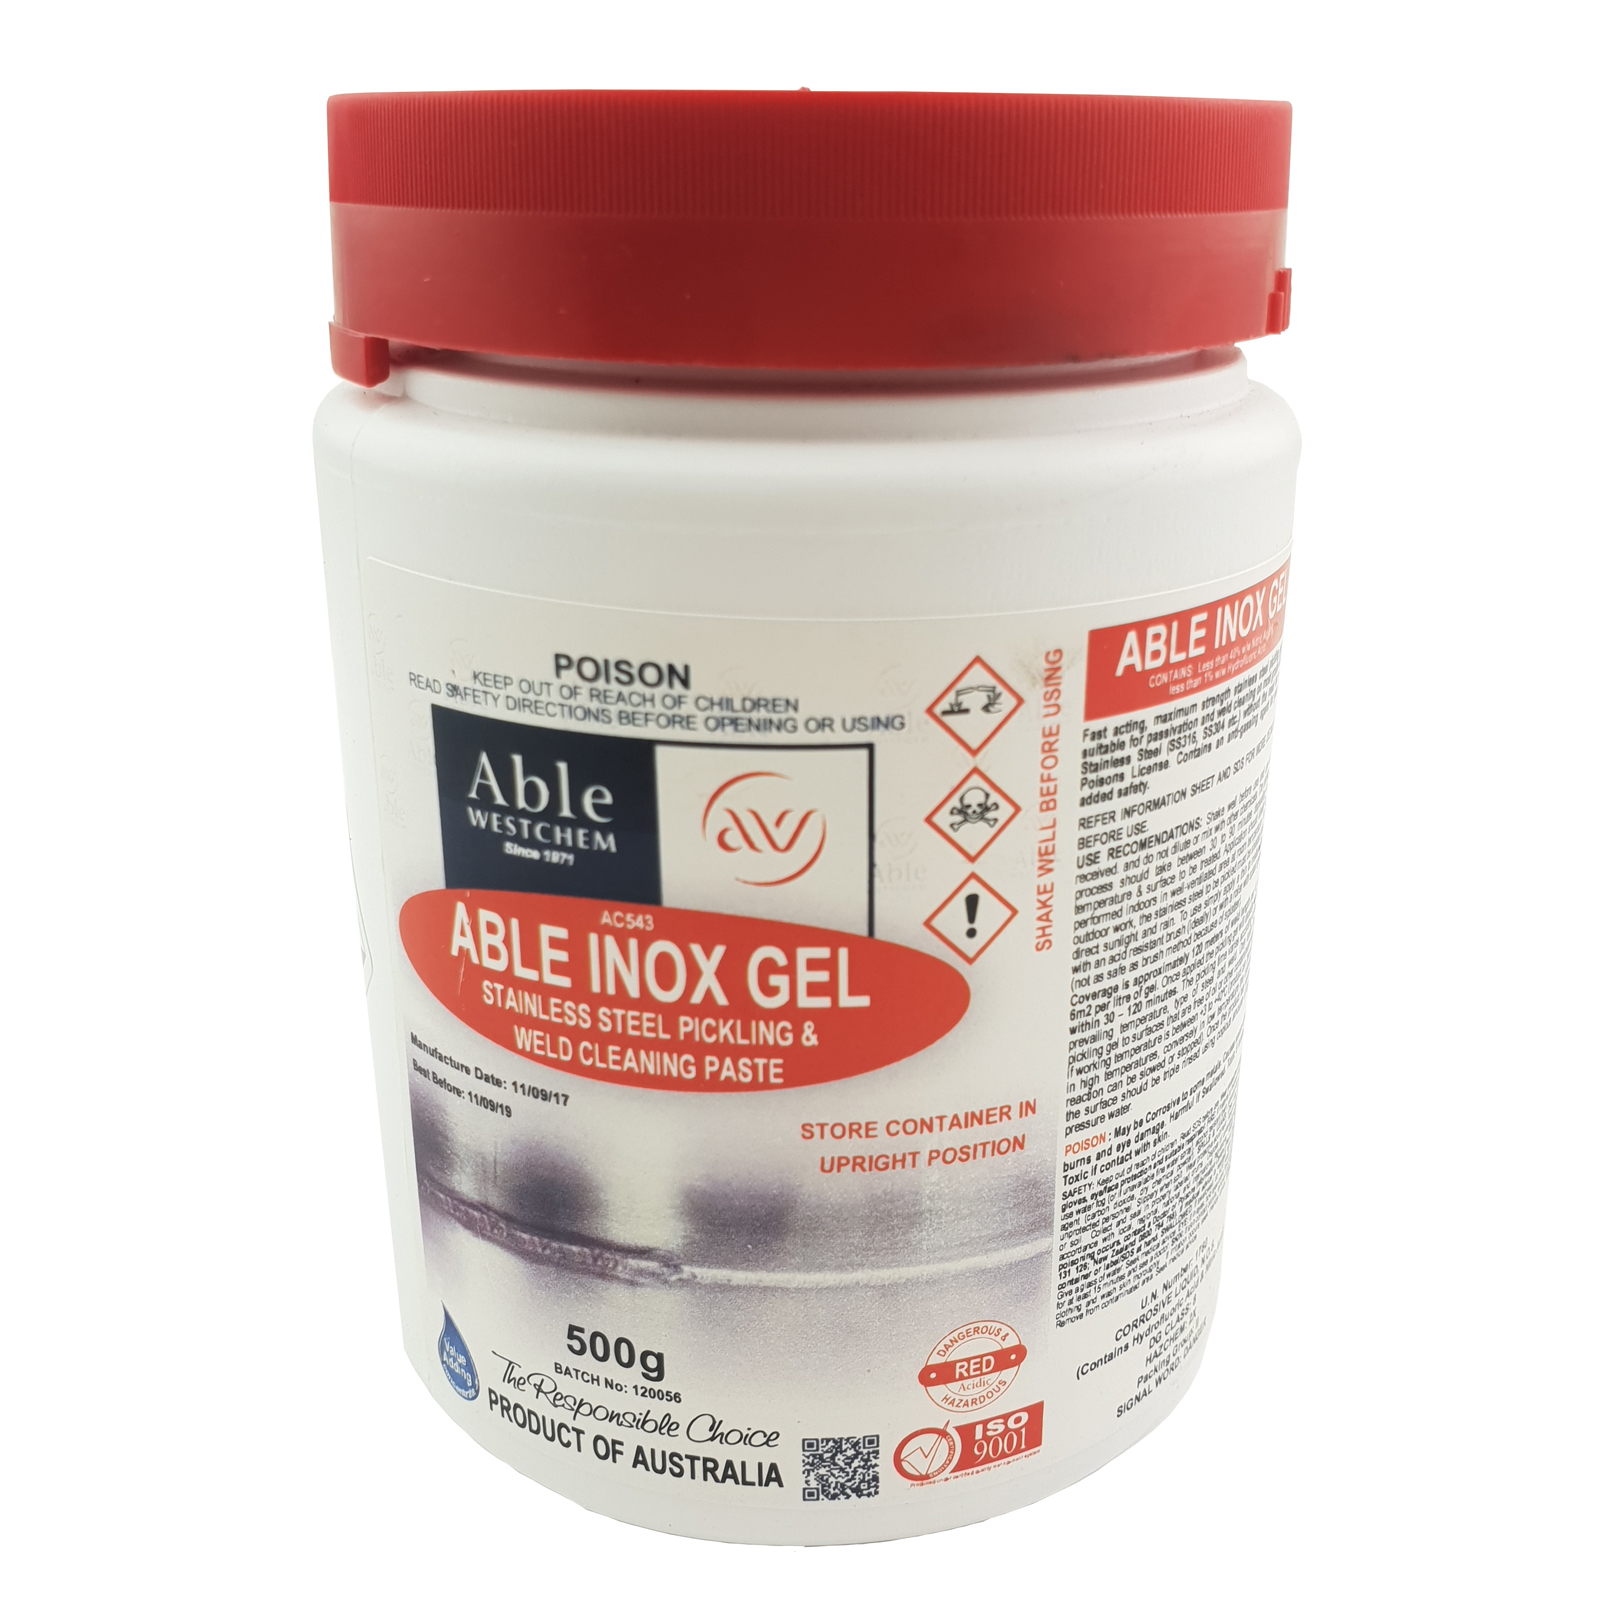 Able Inox Stainless Steel Cleaning Pickling Paste 500g